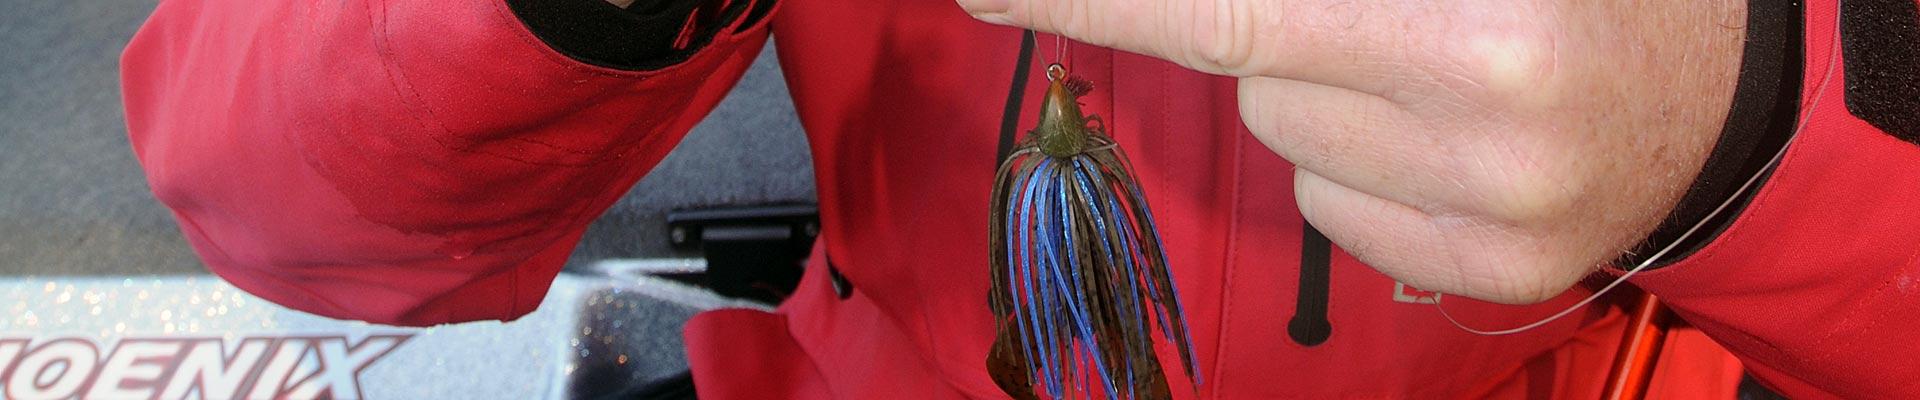 Missile Baits Craw Father 3 1/2 inch Soft Plastic Craw